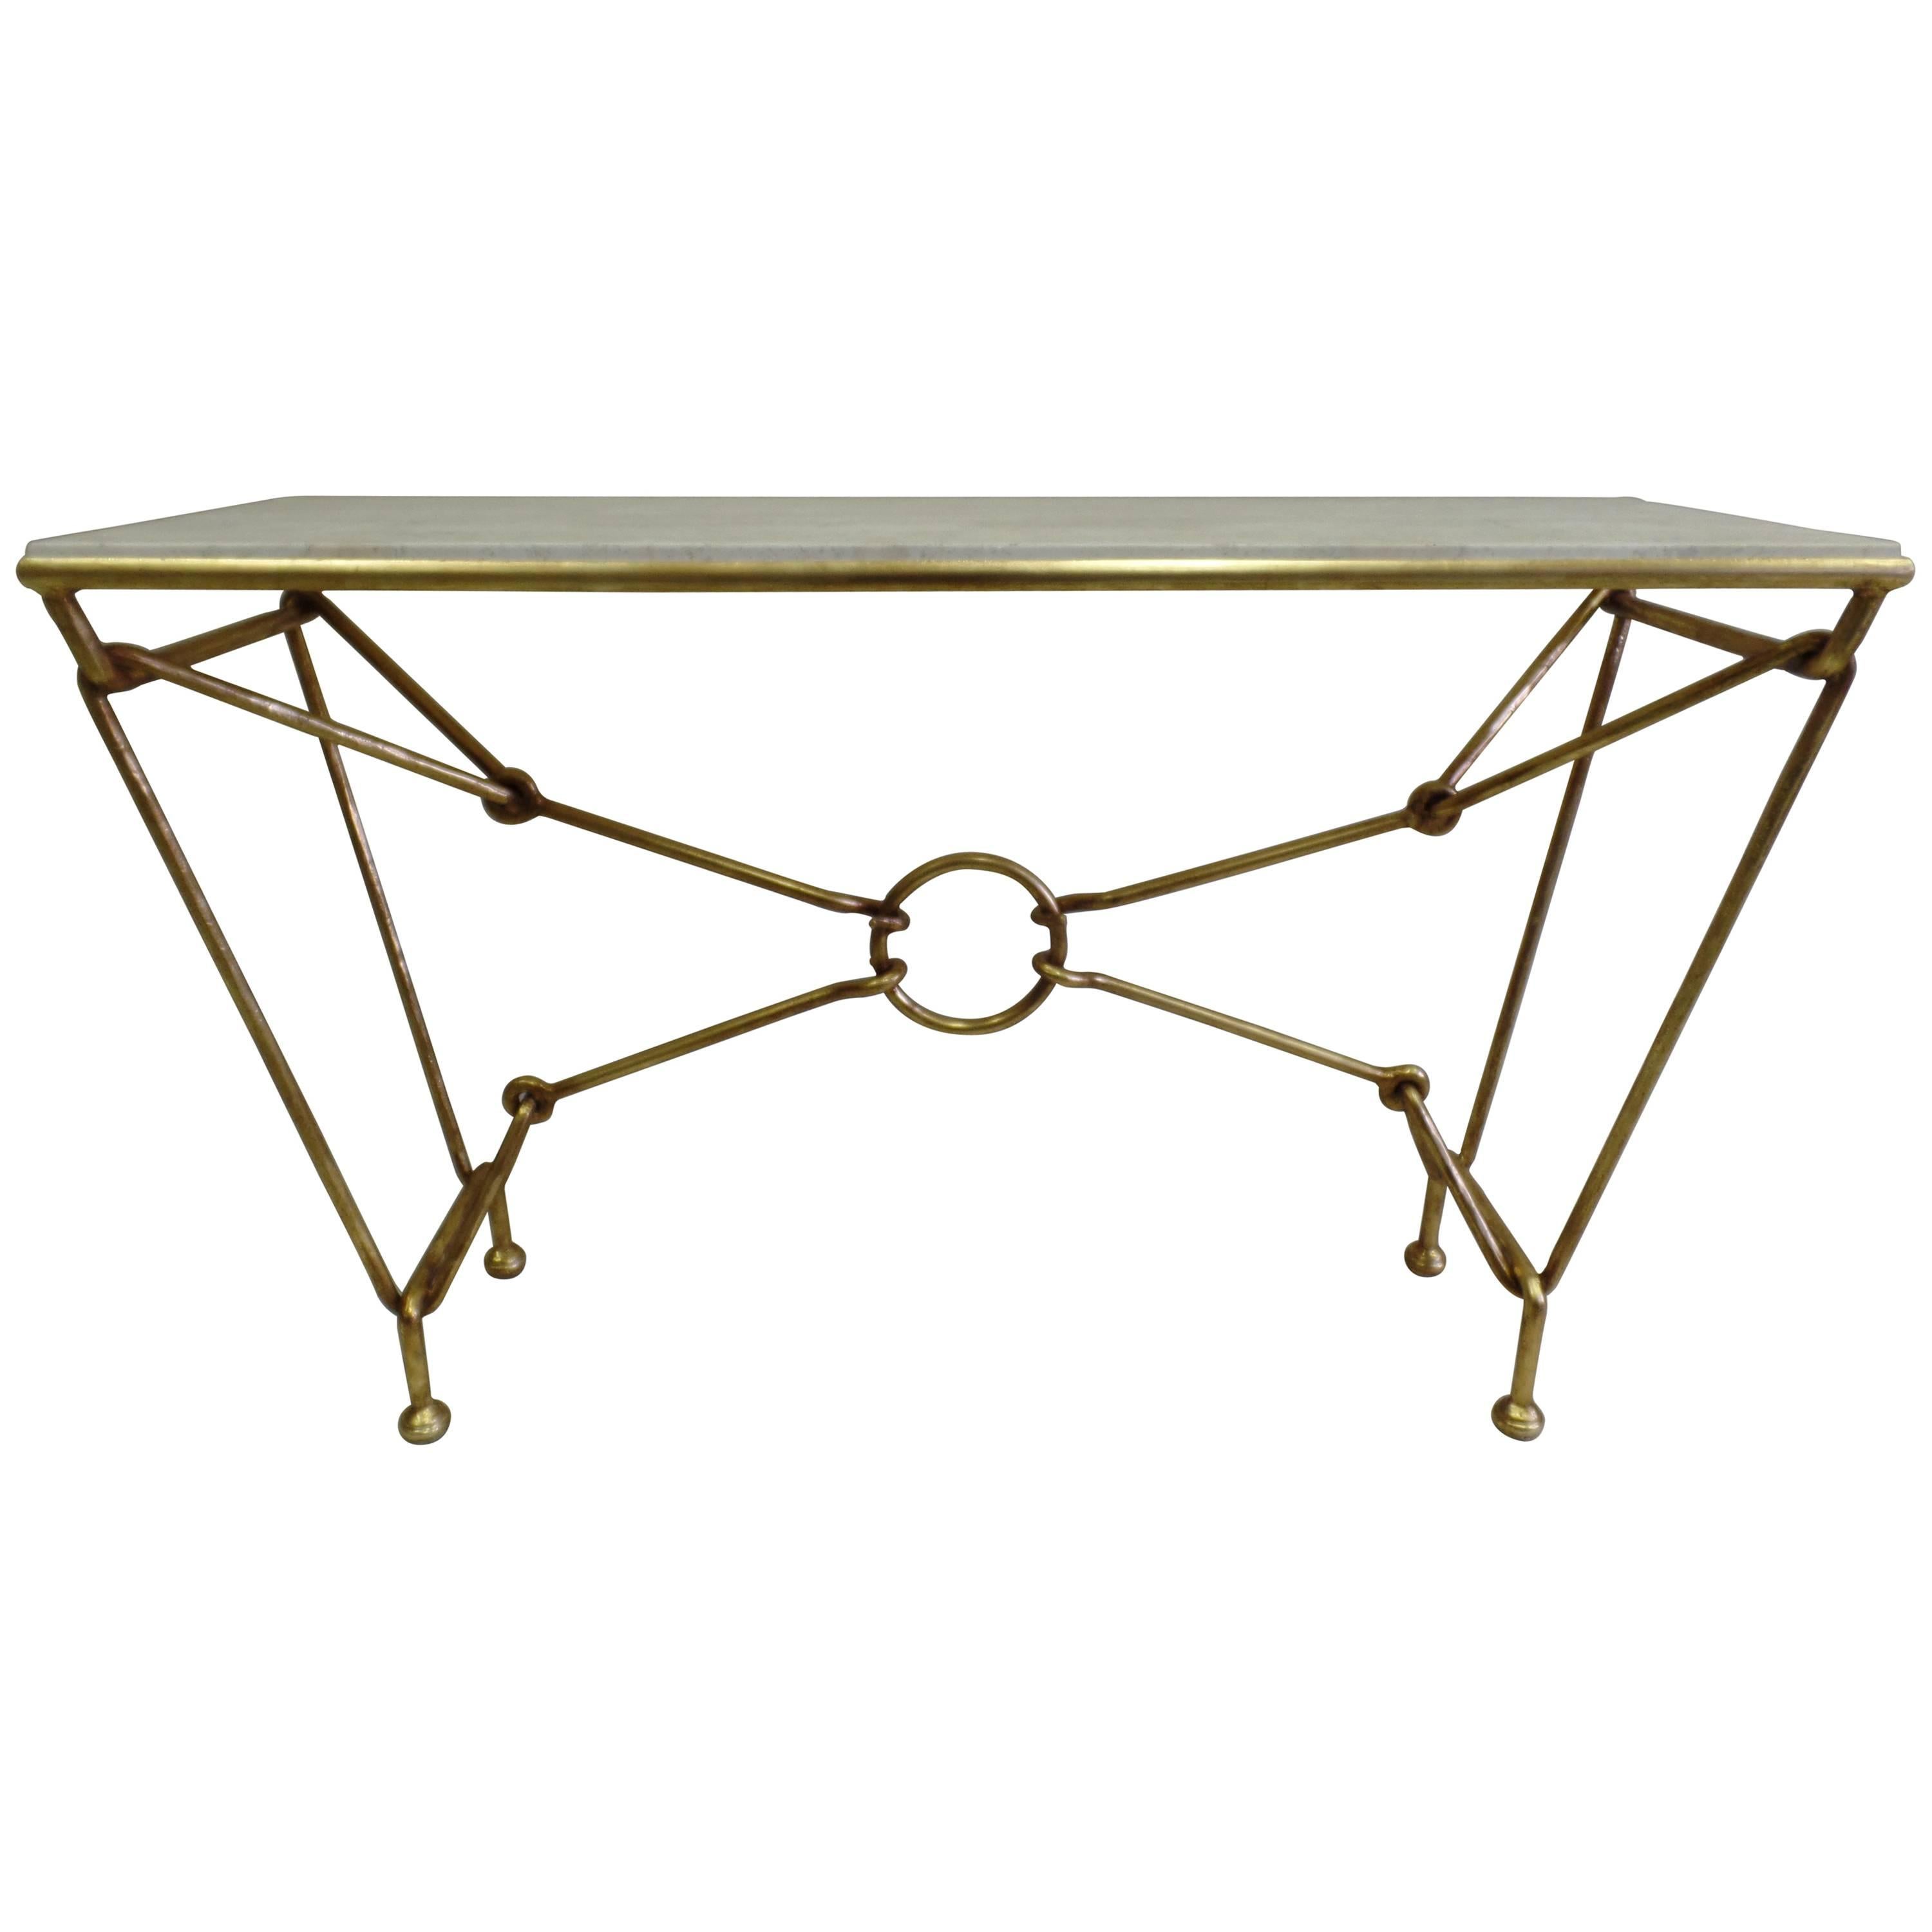 Italian Modern Neoclassical Gilt Iron Console by Giovanni Banci for Hermes For Sale